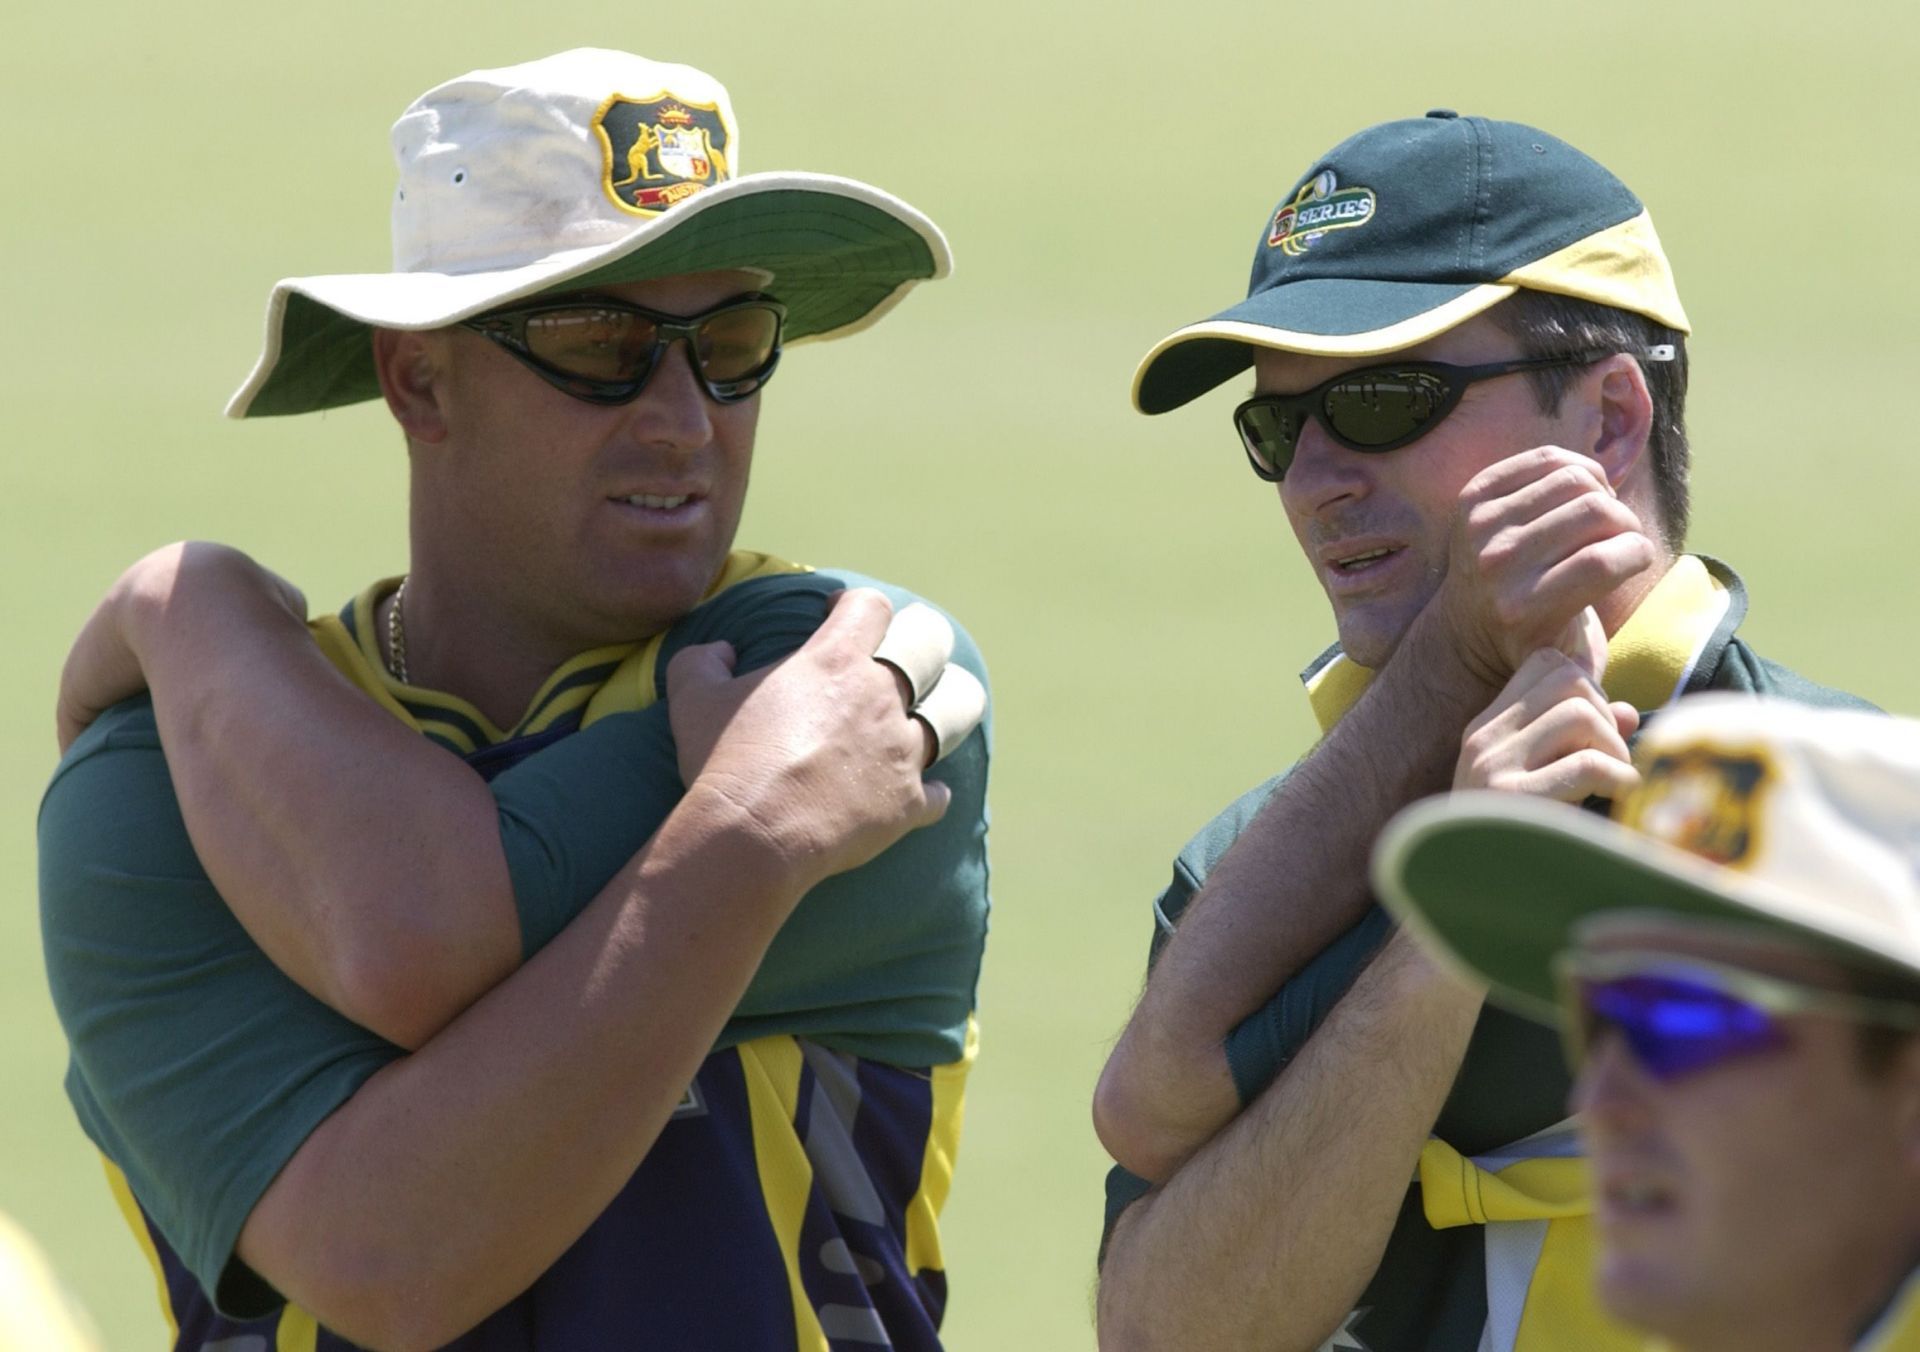 Former Aussie cricketers Shane Warne (left) and Steve Waugh. Pic: Getty Images